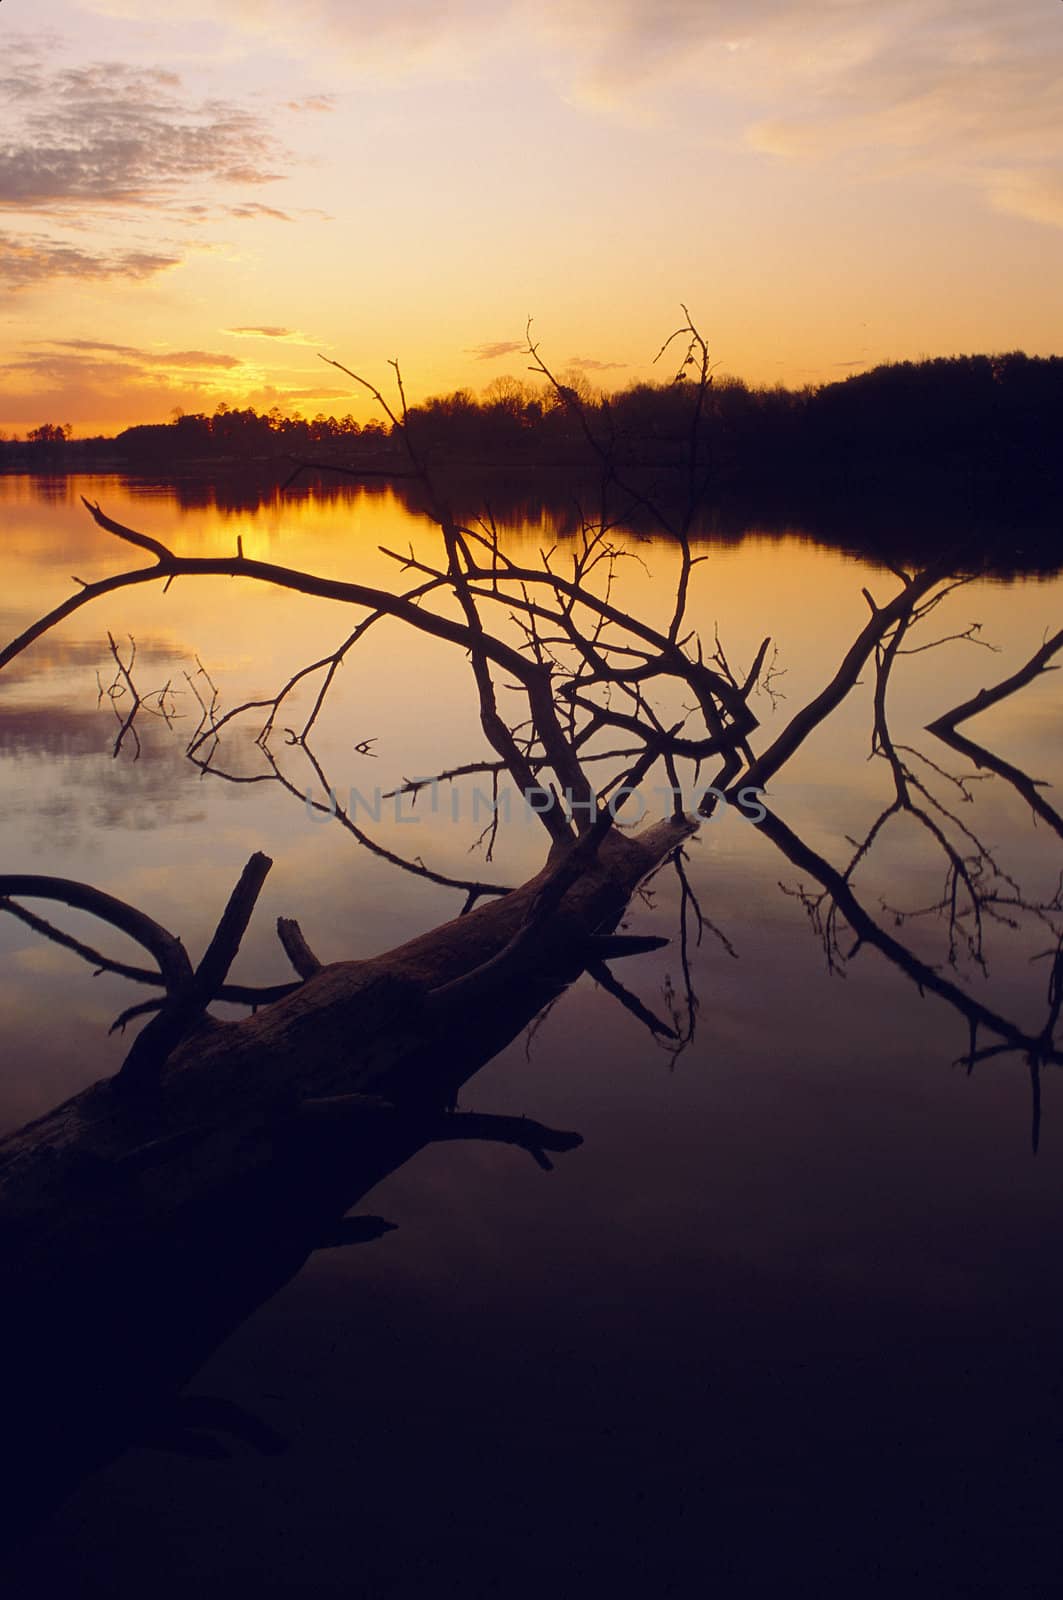 Sunset over lake with fallen tree